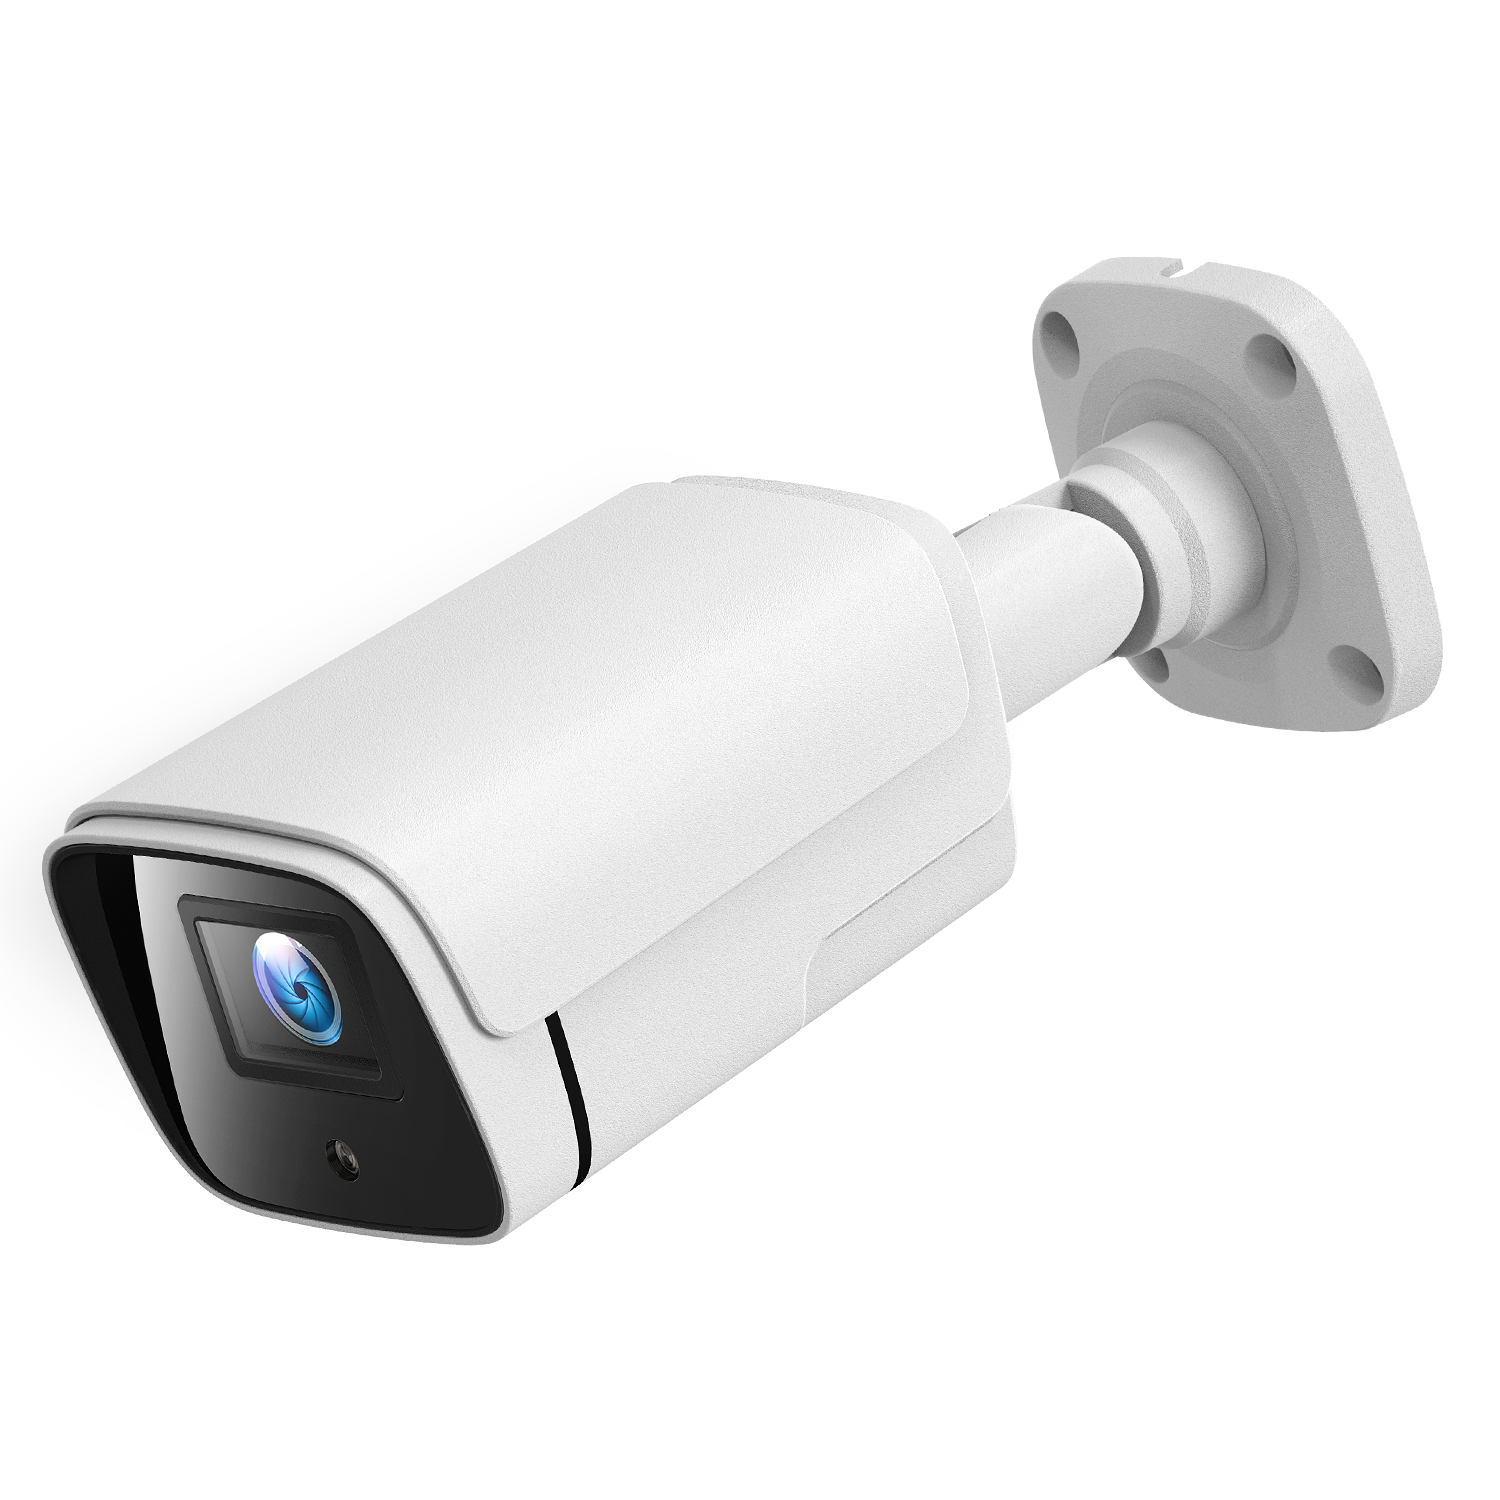 A Single Security Camera For Toguard W504 Security System